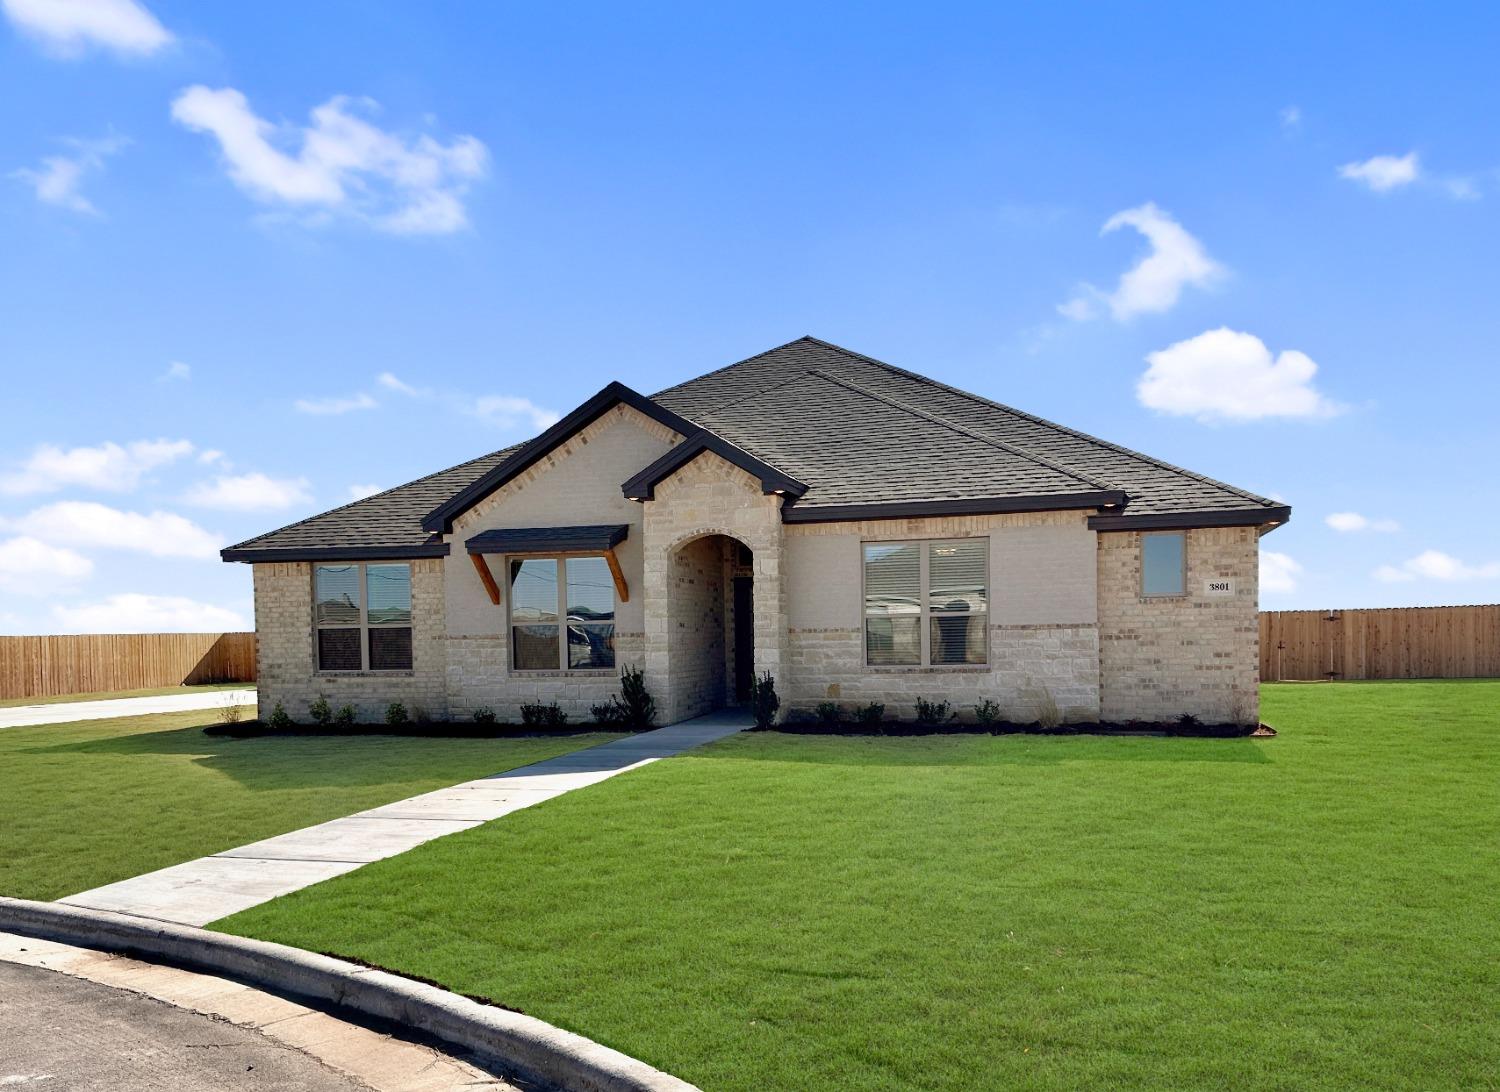 South Lubbock Beauty now completed!  Brand new Homemakers home located in Park Hill Estates. 2,385 Sq. Ft.  4 bed, 3 full baths, 2 car garage on a sprawling one-acre lot. Belgrave Floorplan.  Sod and Sprinkler included in  front. All on one level.